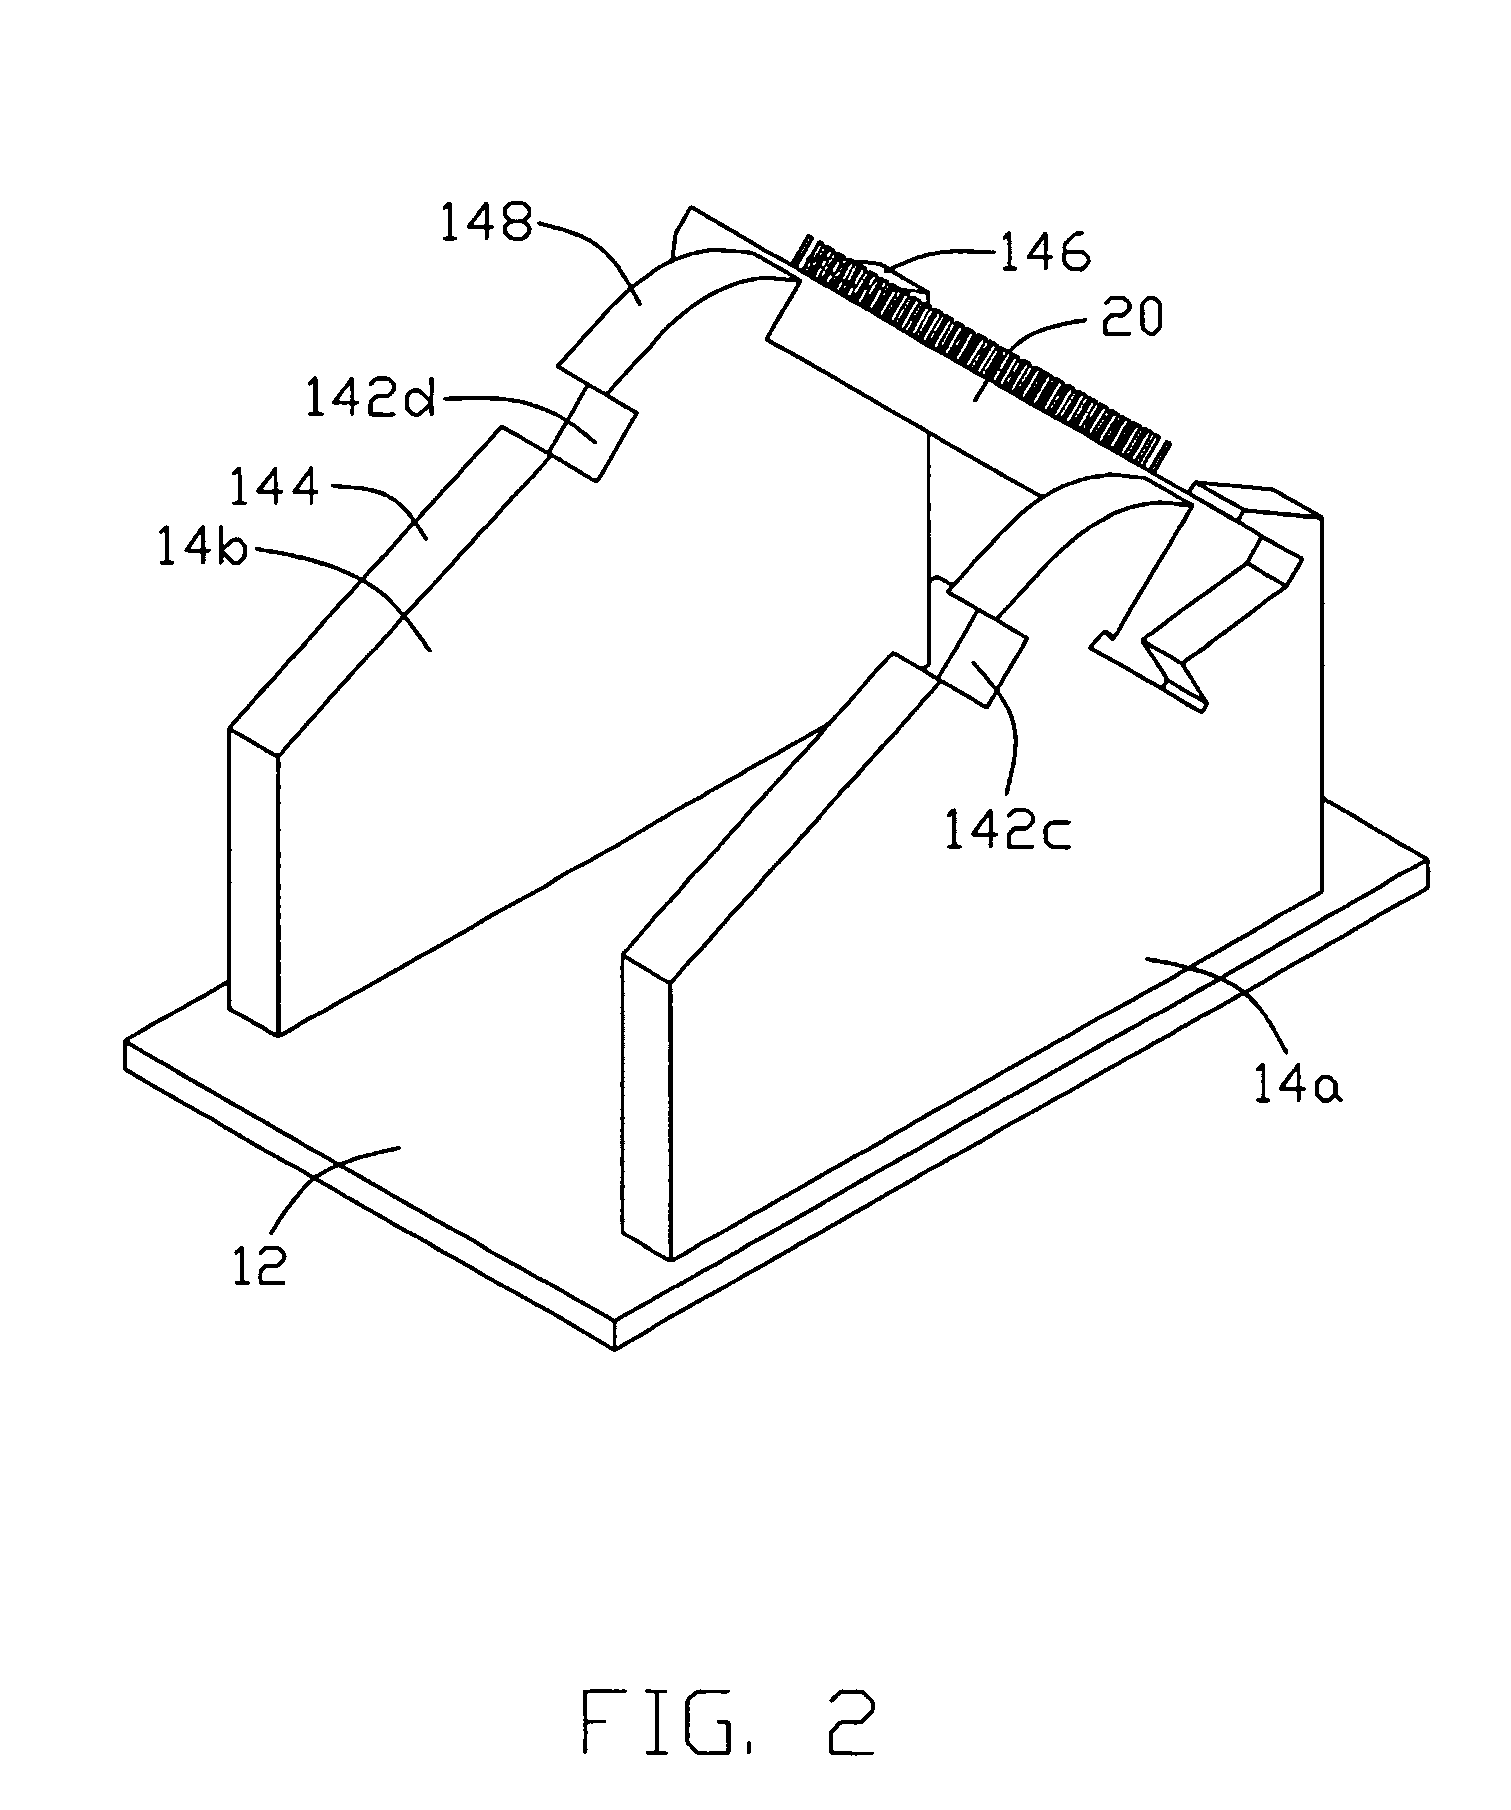 Apparatus for a wire wrapping process